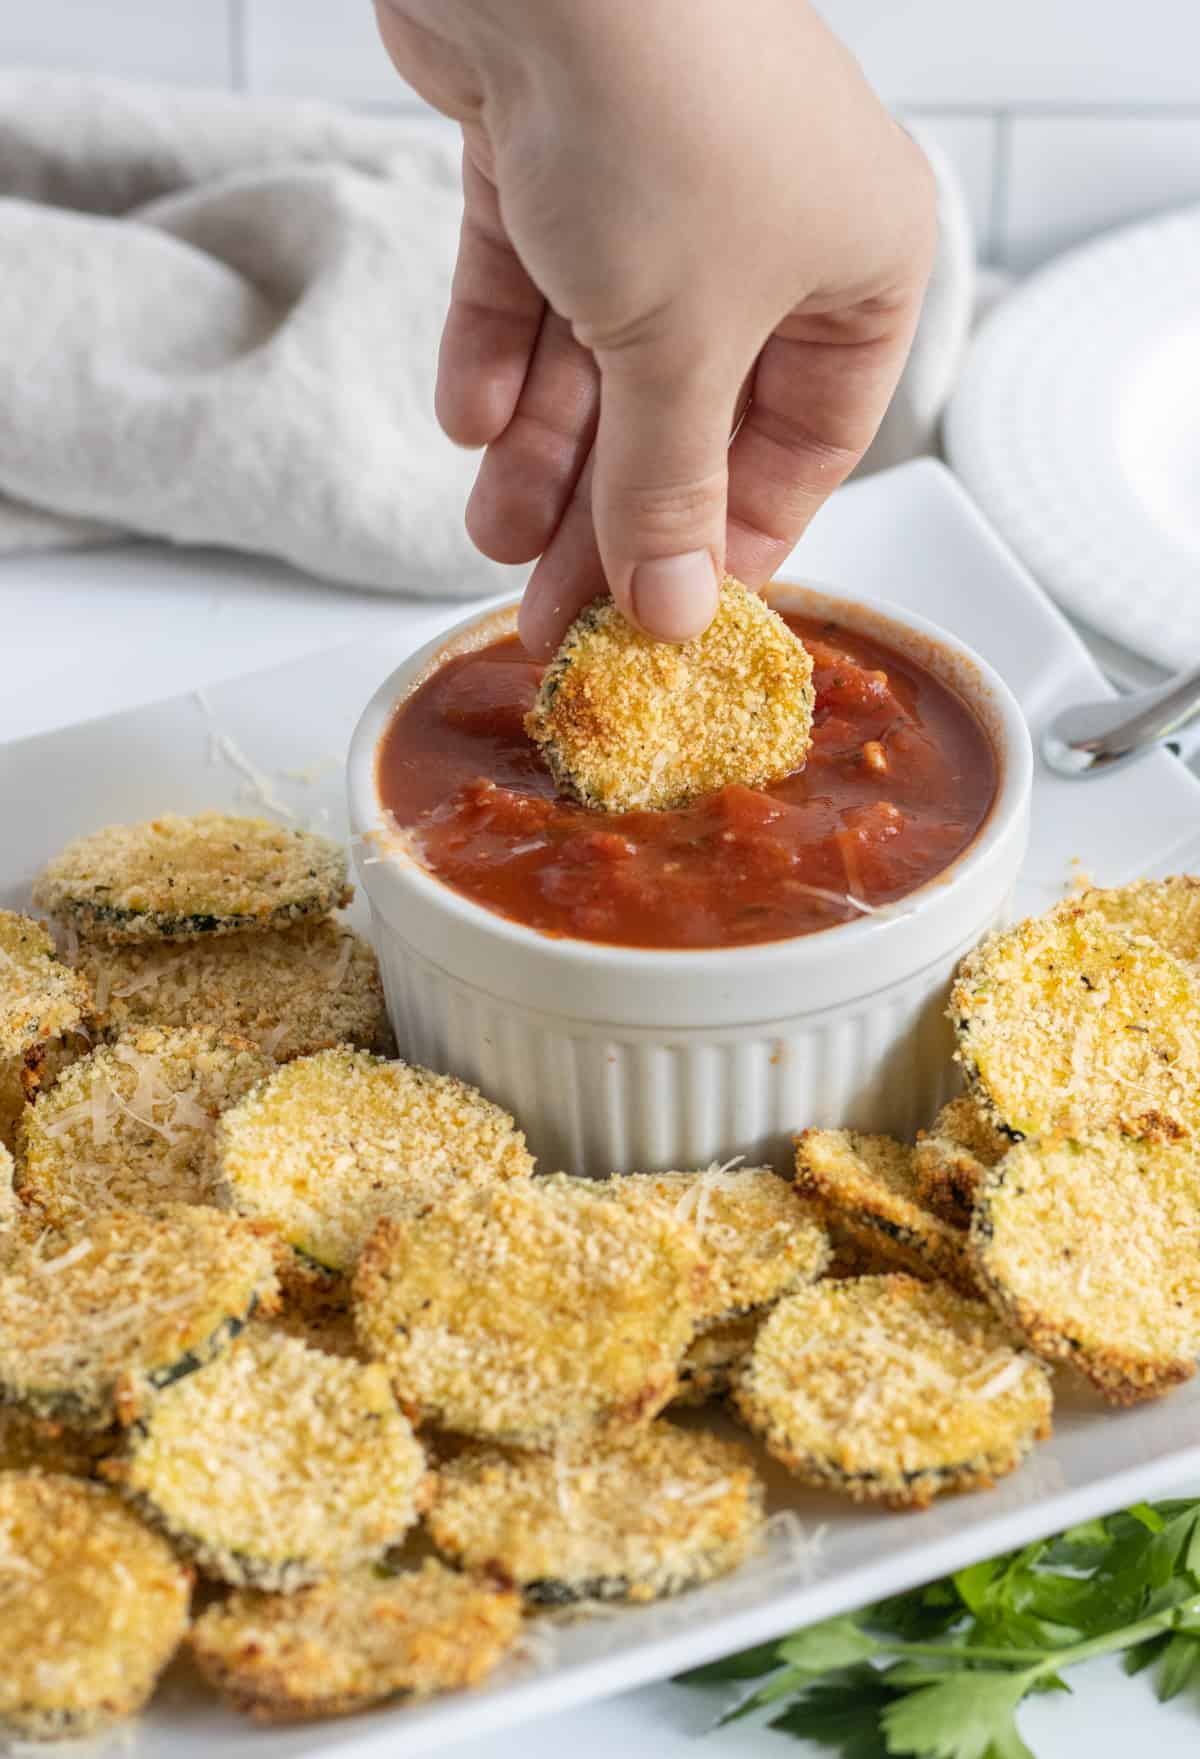 A hand dipping an oven fried zucchini chip into a bowl of marinara.